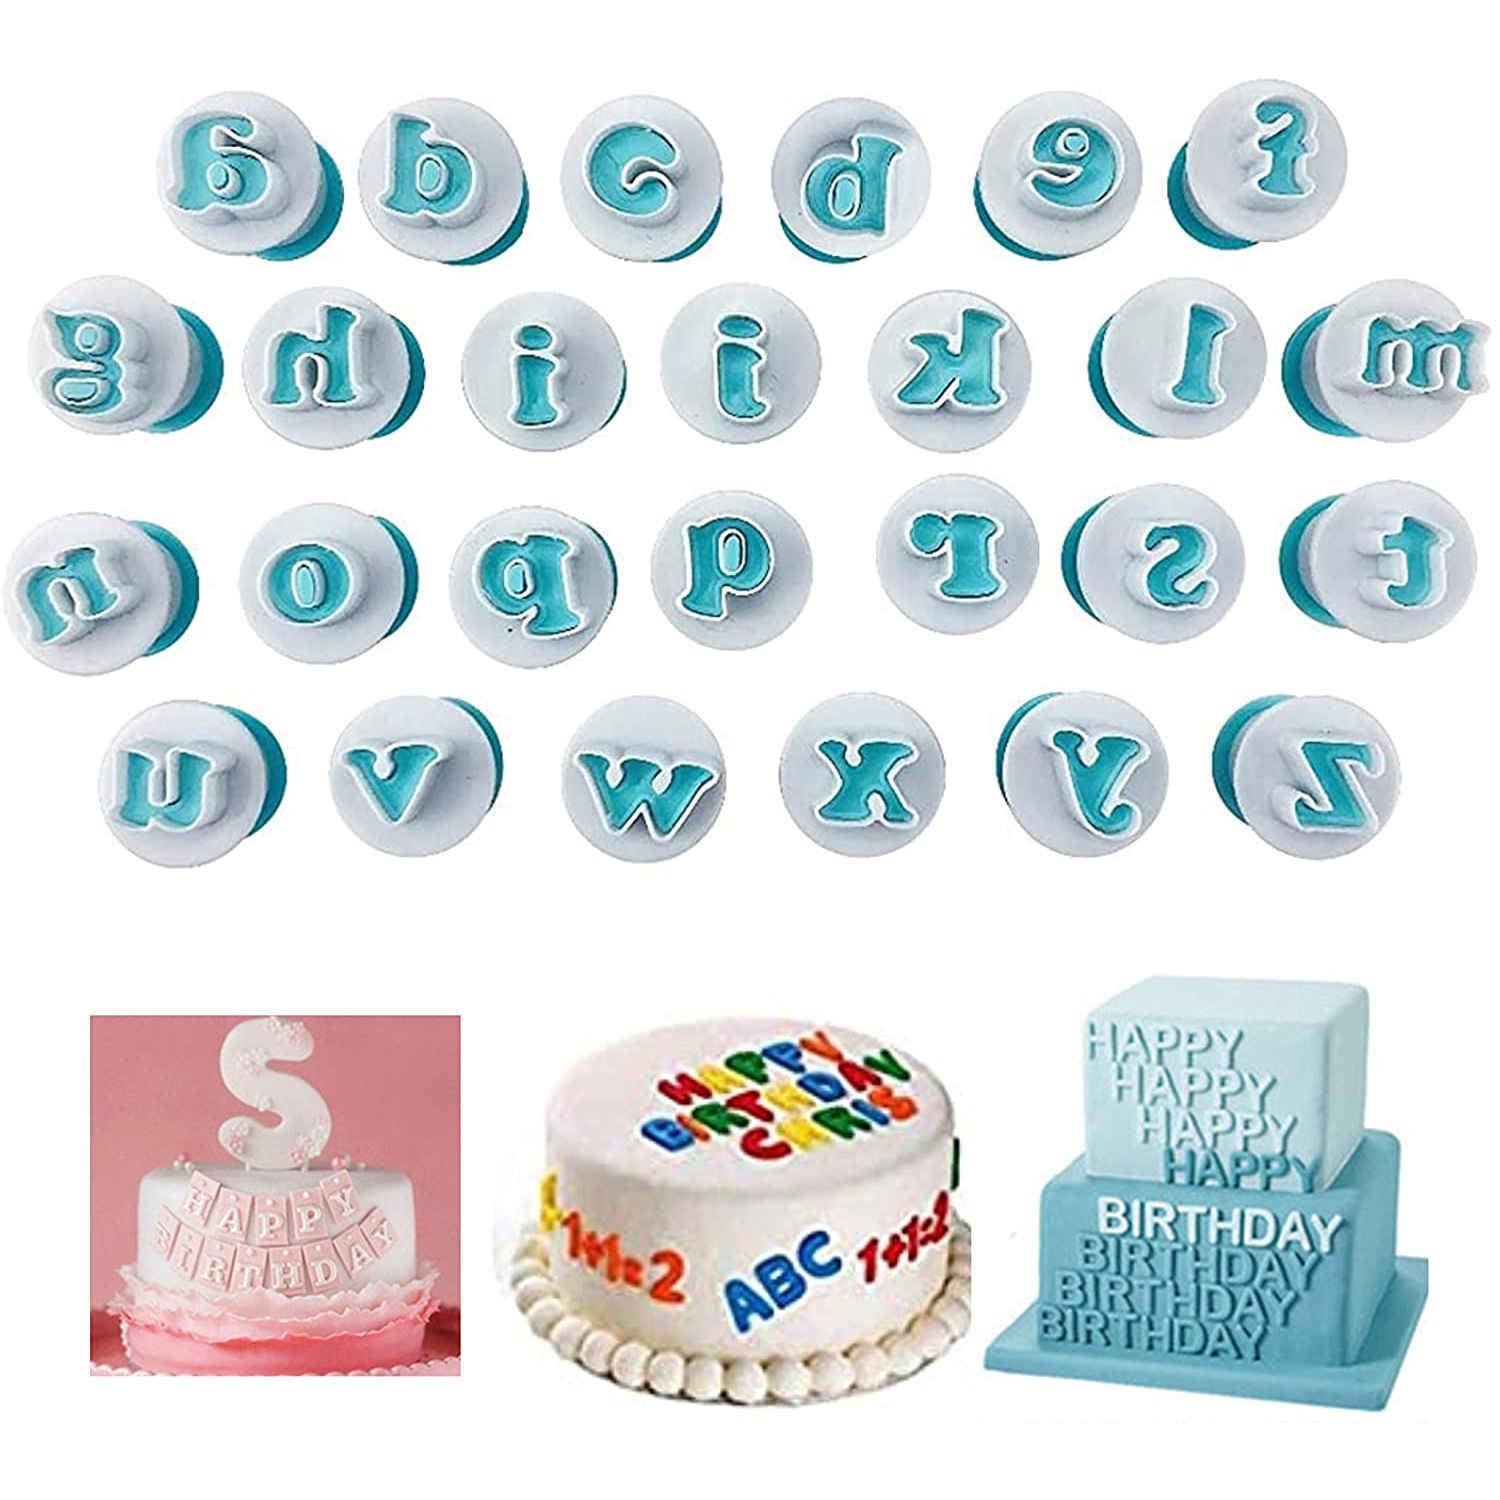 Amazon.com: Alphabet Stamps Cake Decorating Set - Number Cookie Cutters  Alphabet Fondant Cake Decorating White Letter Stamps for Kids - Decorating  Paste and Fondant Stamps DIY Stencil Cutter Mold Letters Stamps: Home